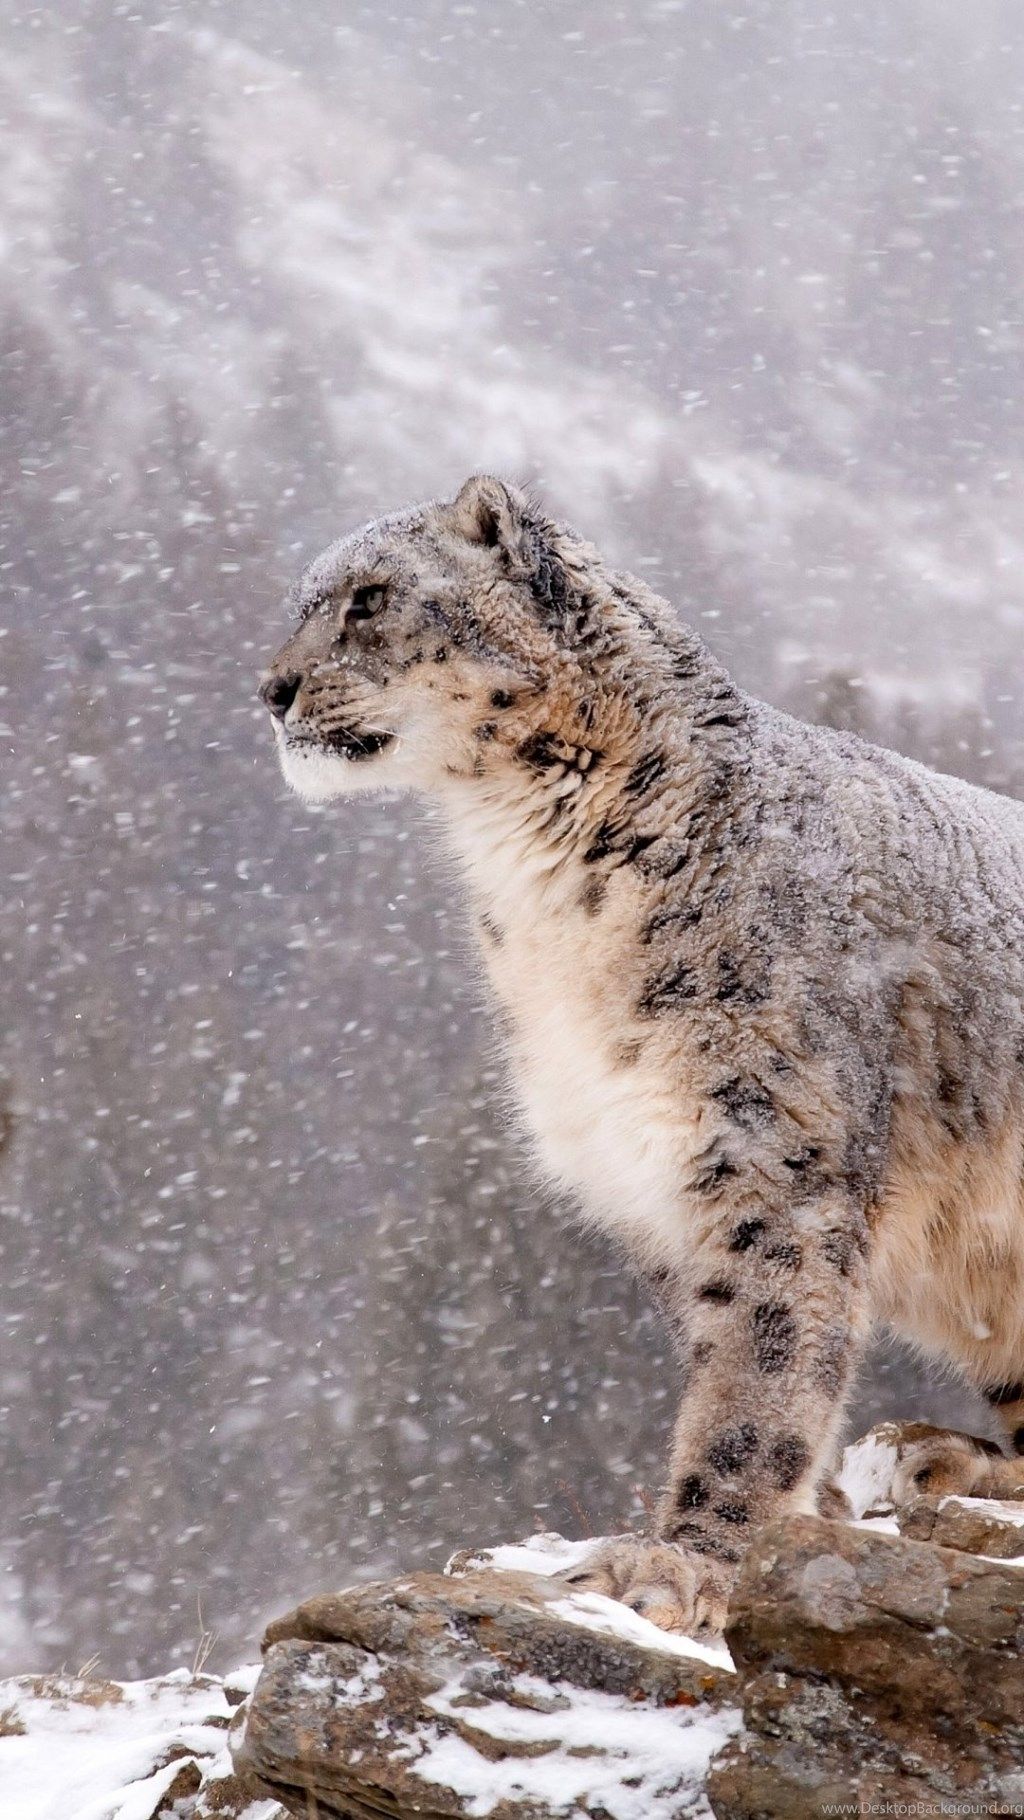 Snow Leopard iPhone 6 Wallpaper & Background Beautiful Best Available For Download Snow Leopard iPhone 6 Photo Free On Zicxa.com Image